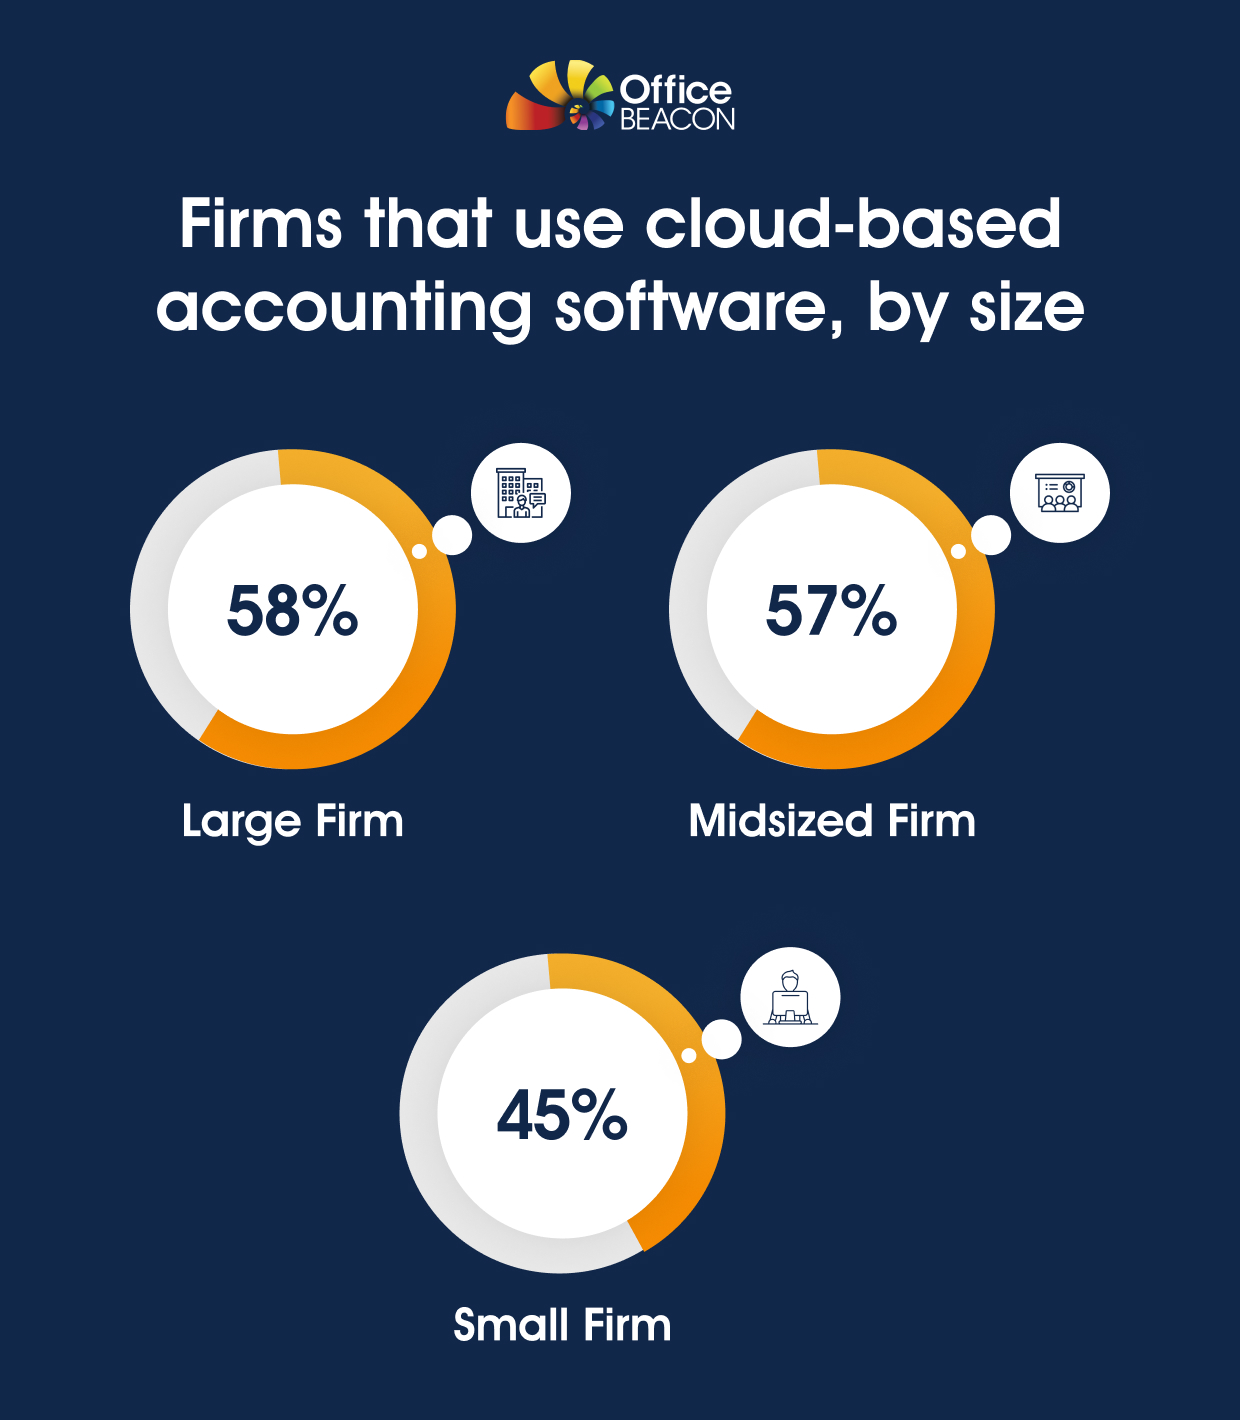 A statistical image showing the percentage of firms that use cloud accounting software, by size.